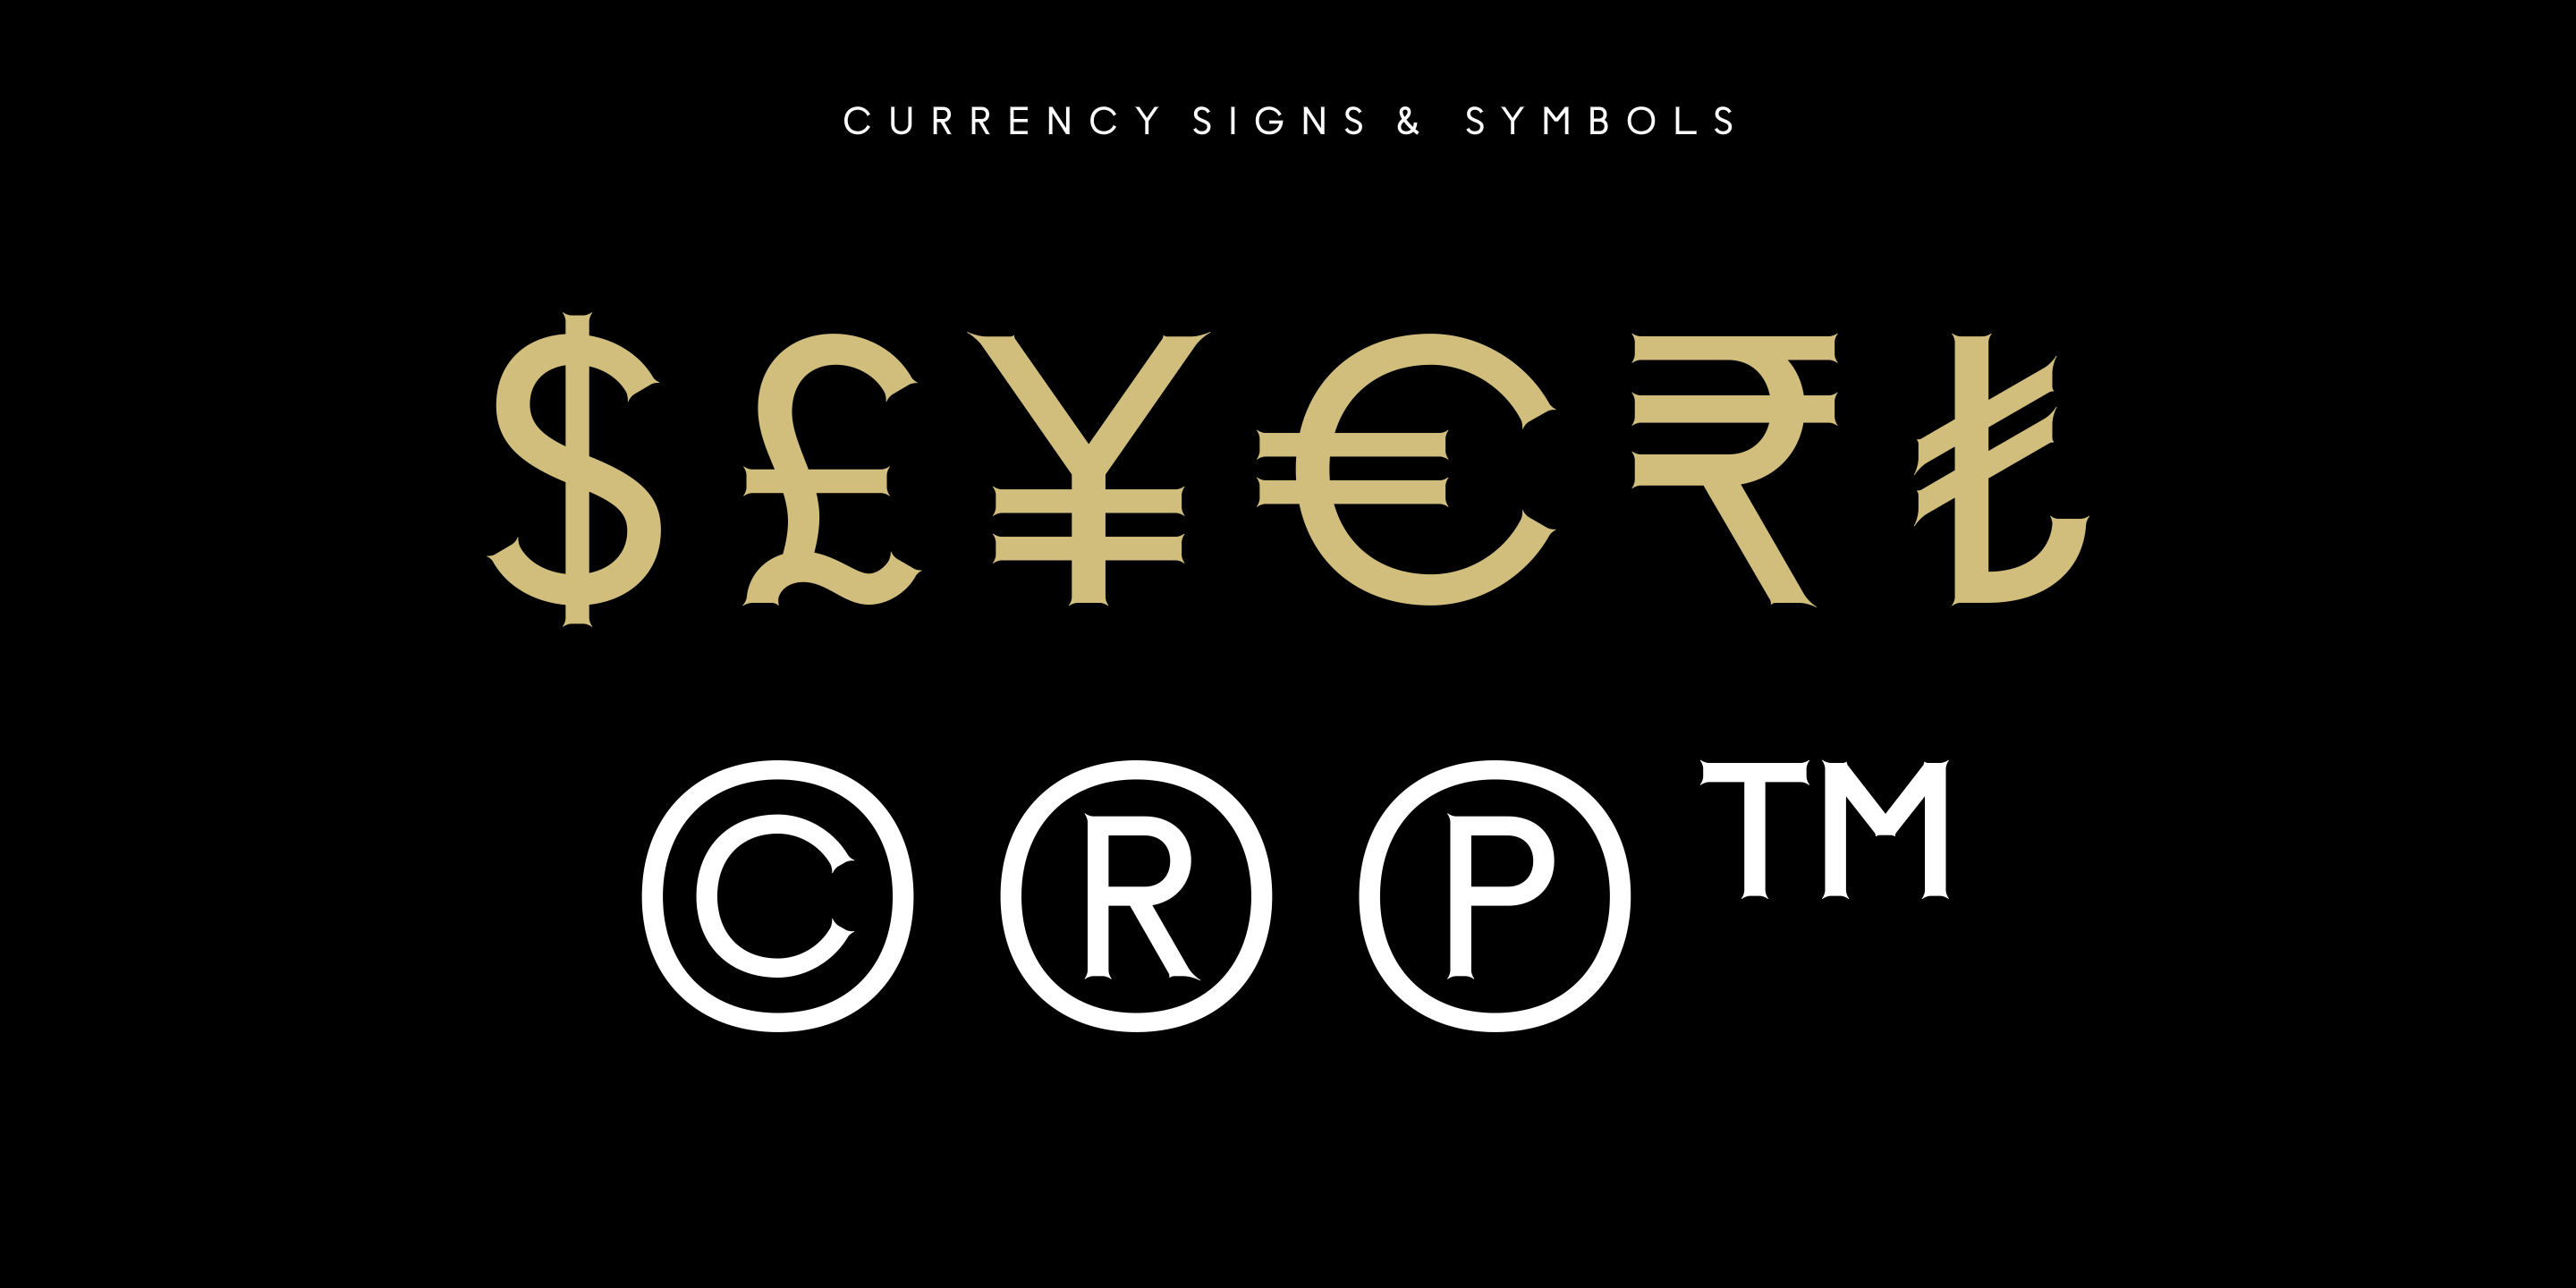 Ostende Gothic Typeface - Currency Signs & Symbols